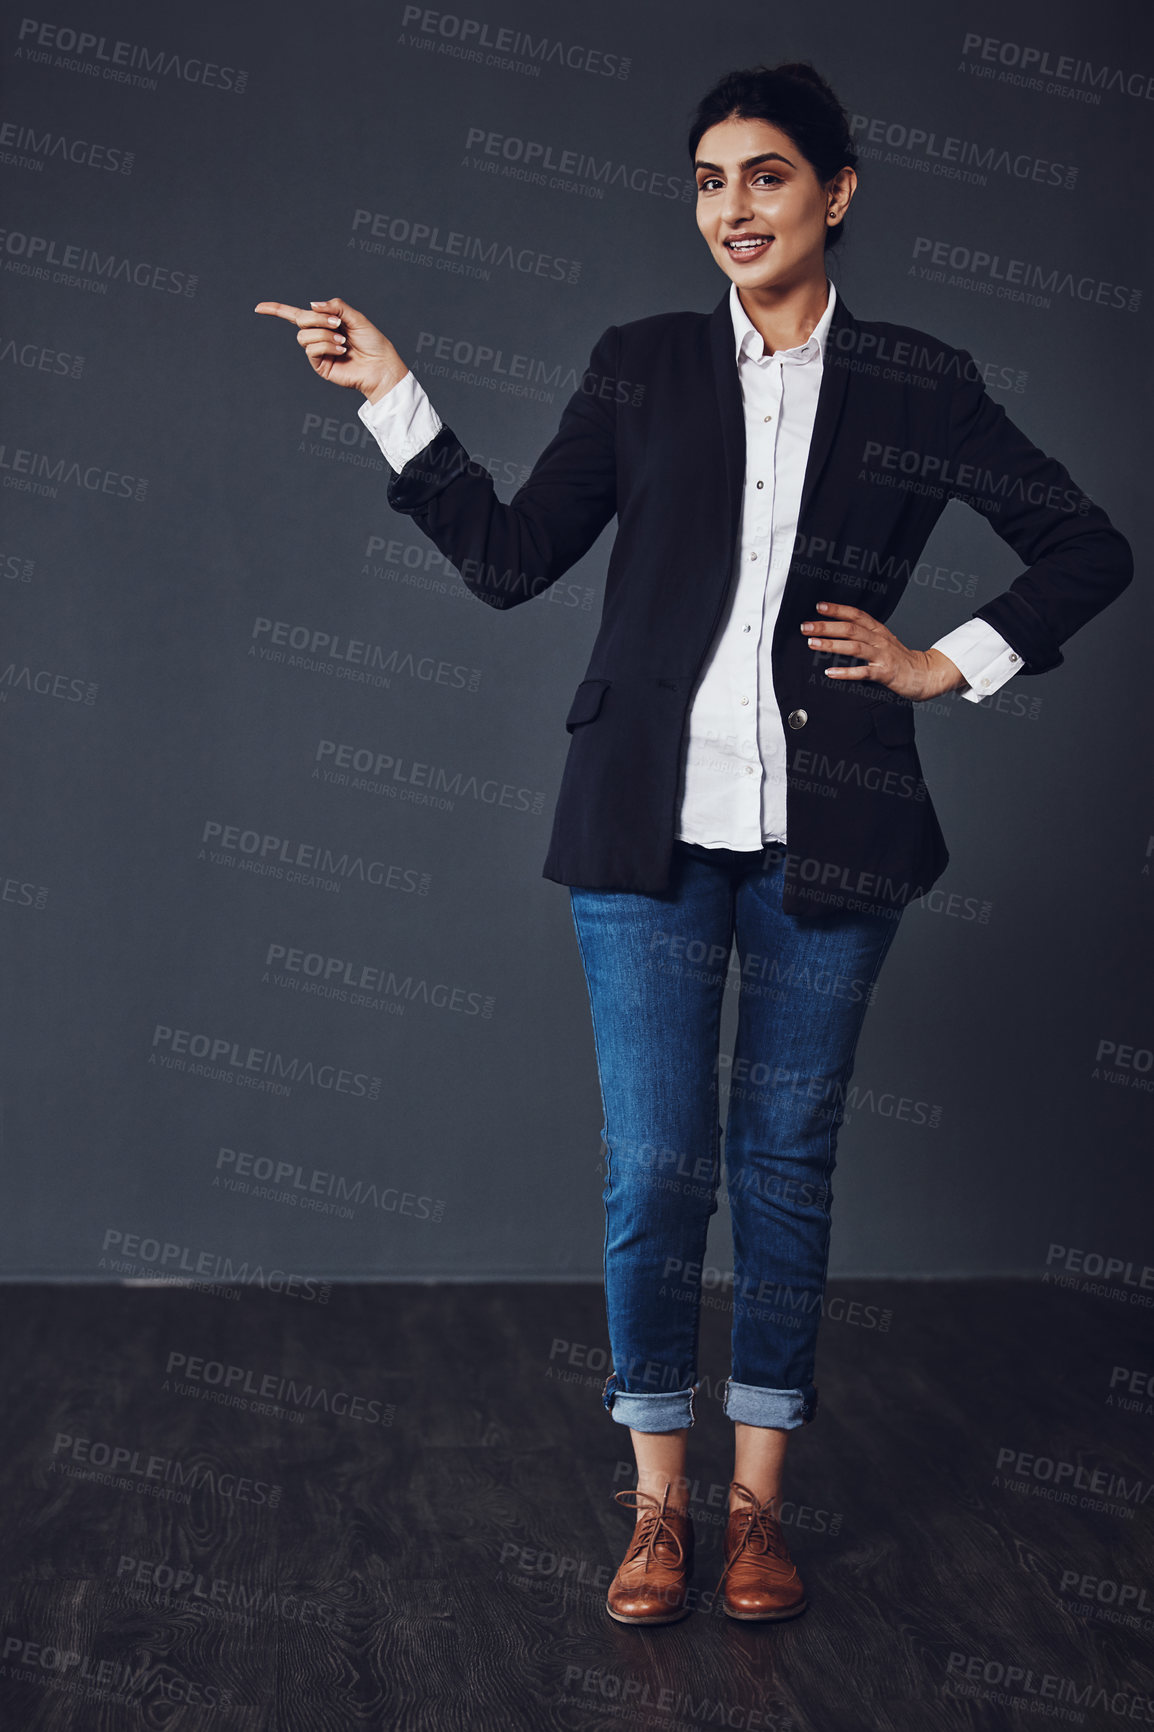 Buy stock photo Studio shot of an attractive young businesswoman pointing at copy space against a dark background